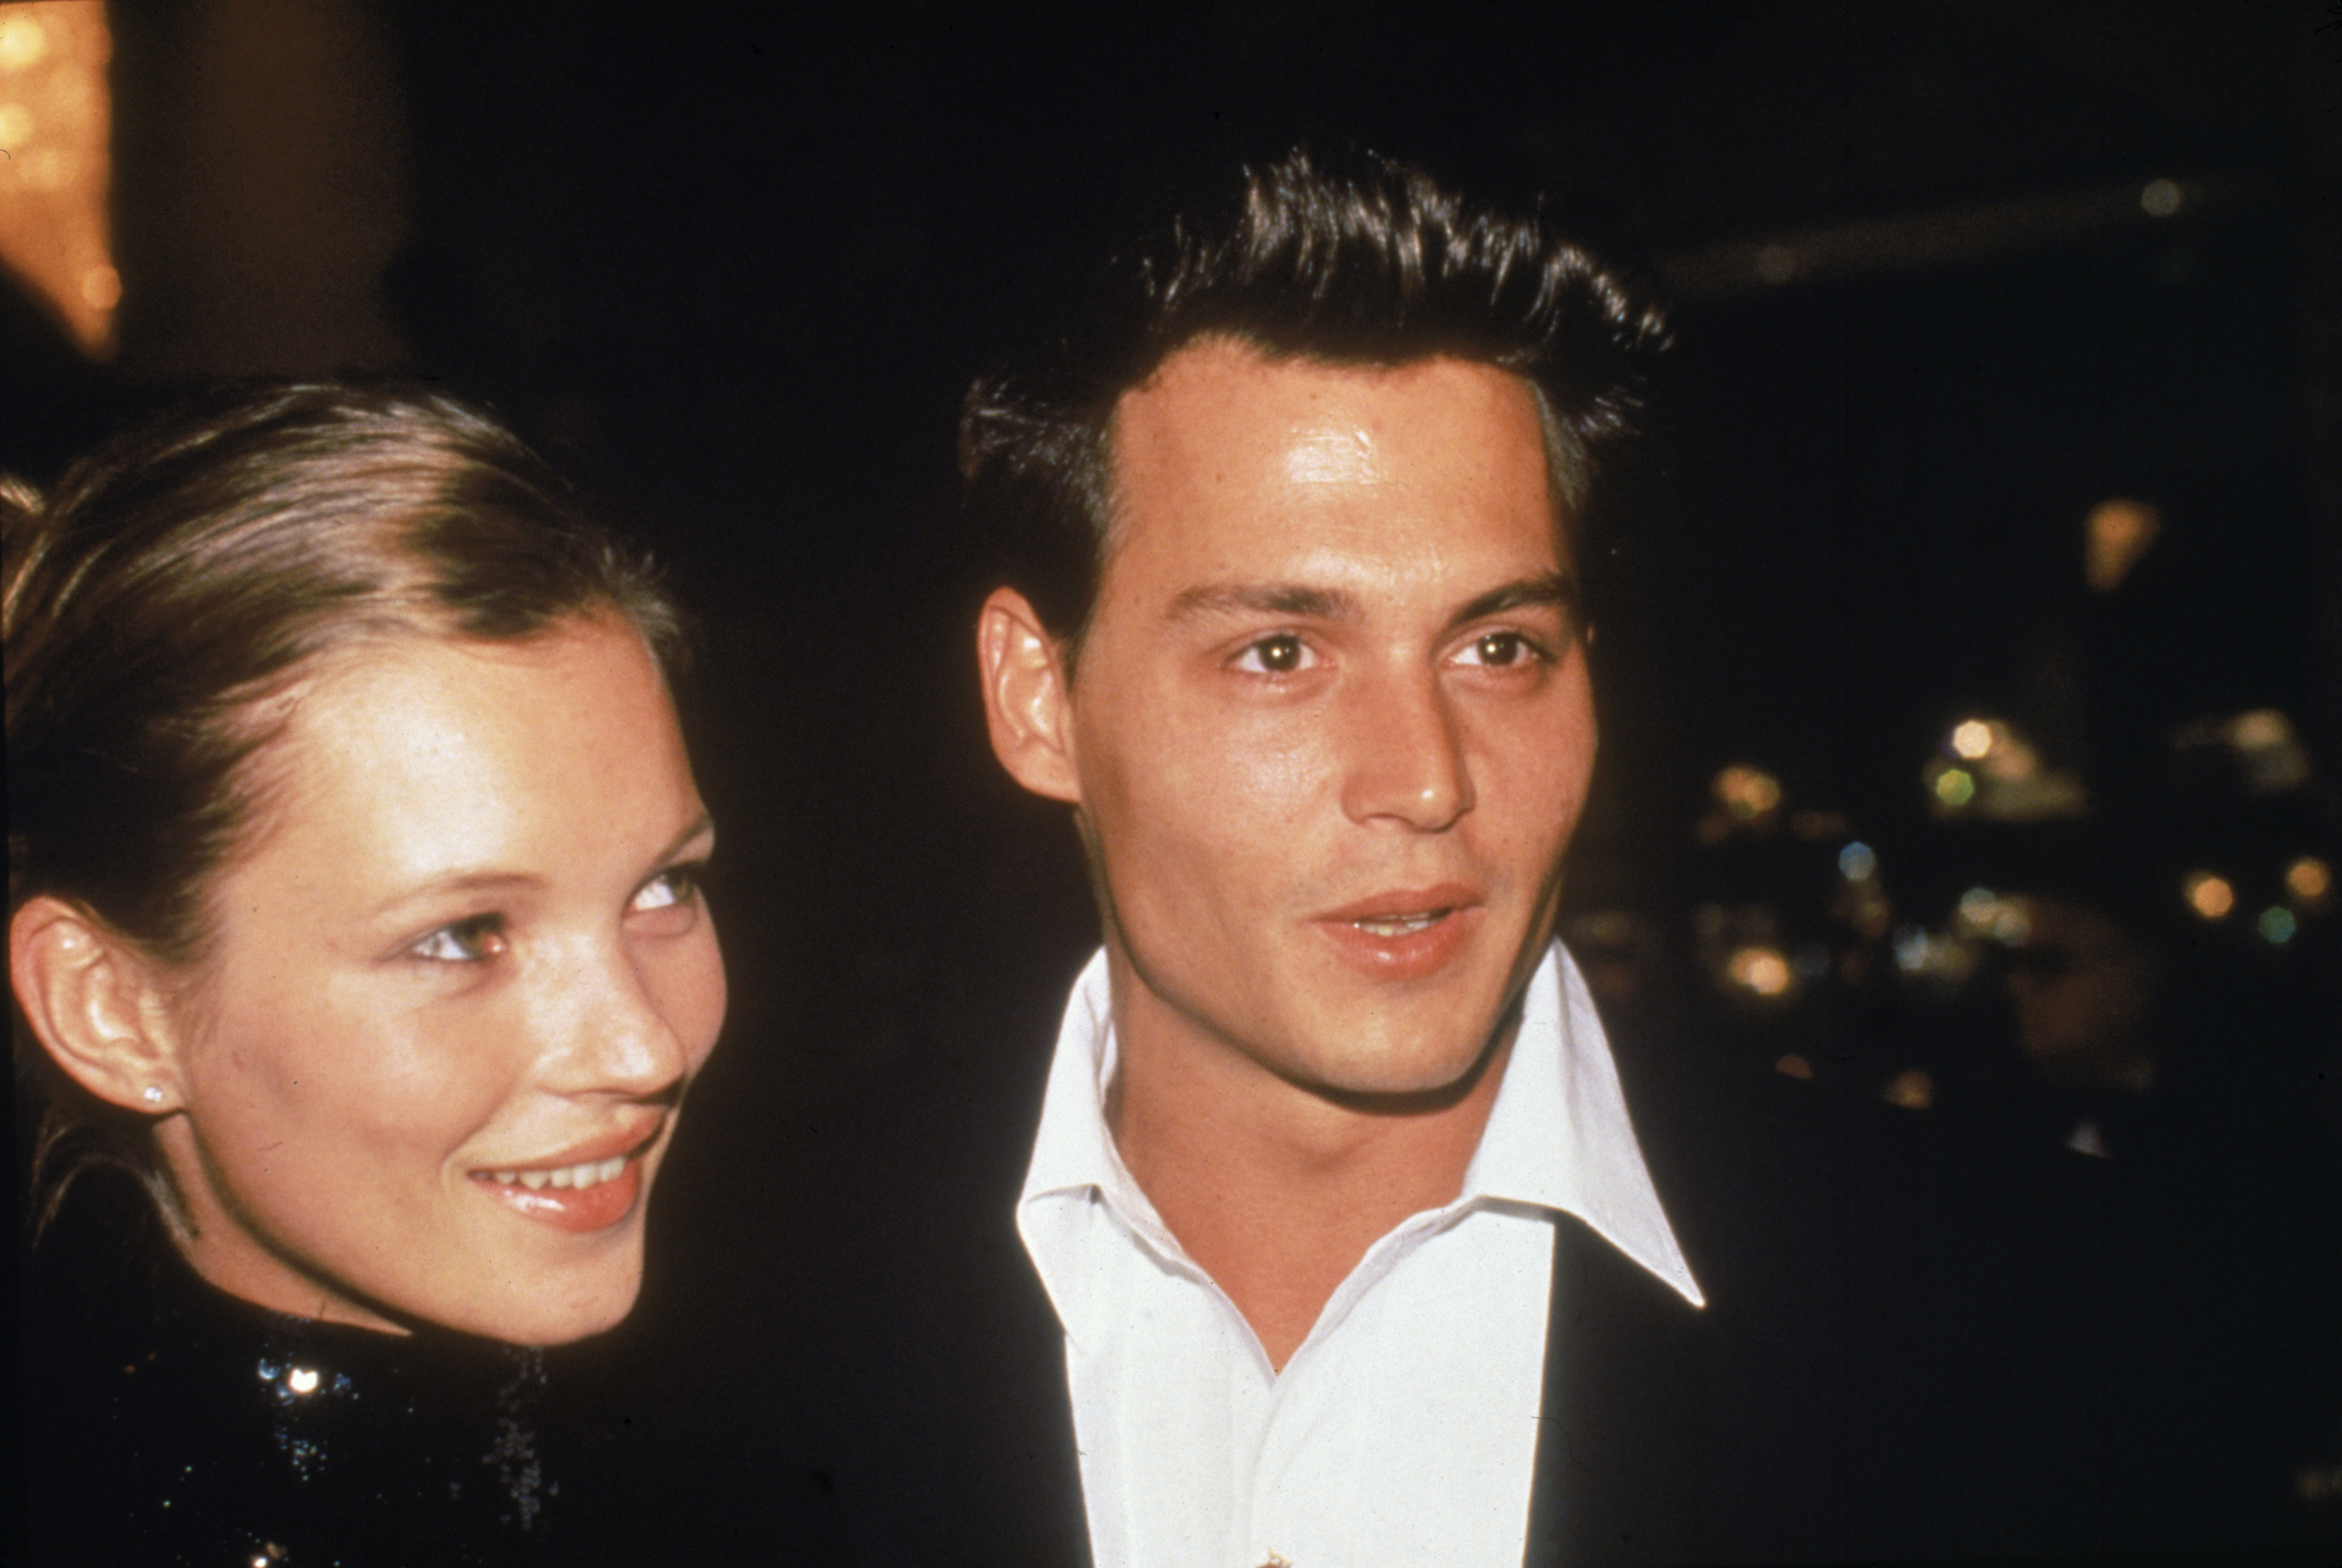 Johnny Depp with his then girlfriend, Kate Moss, at the 52nd Annual Golden Globe Awards in Beverly Hills, California, January 21, 1995. | Source: Getty Images